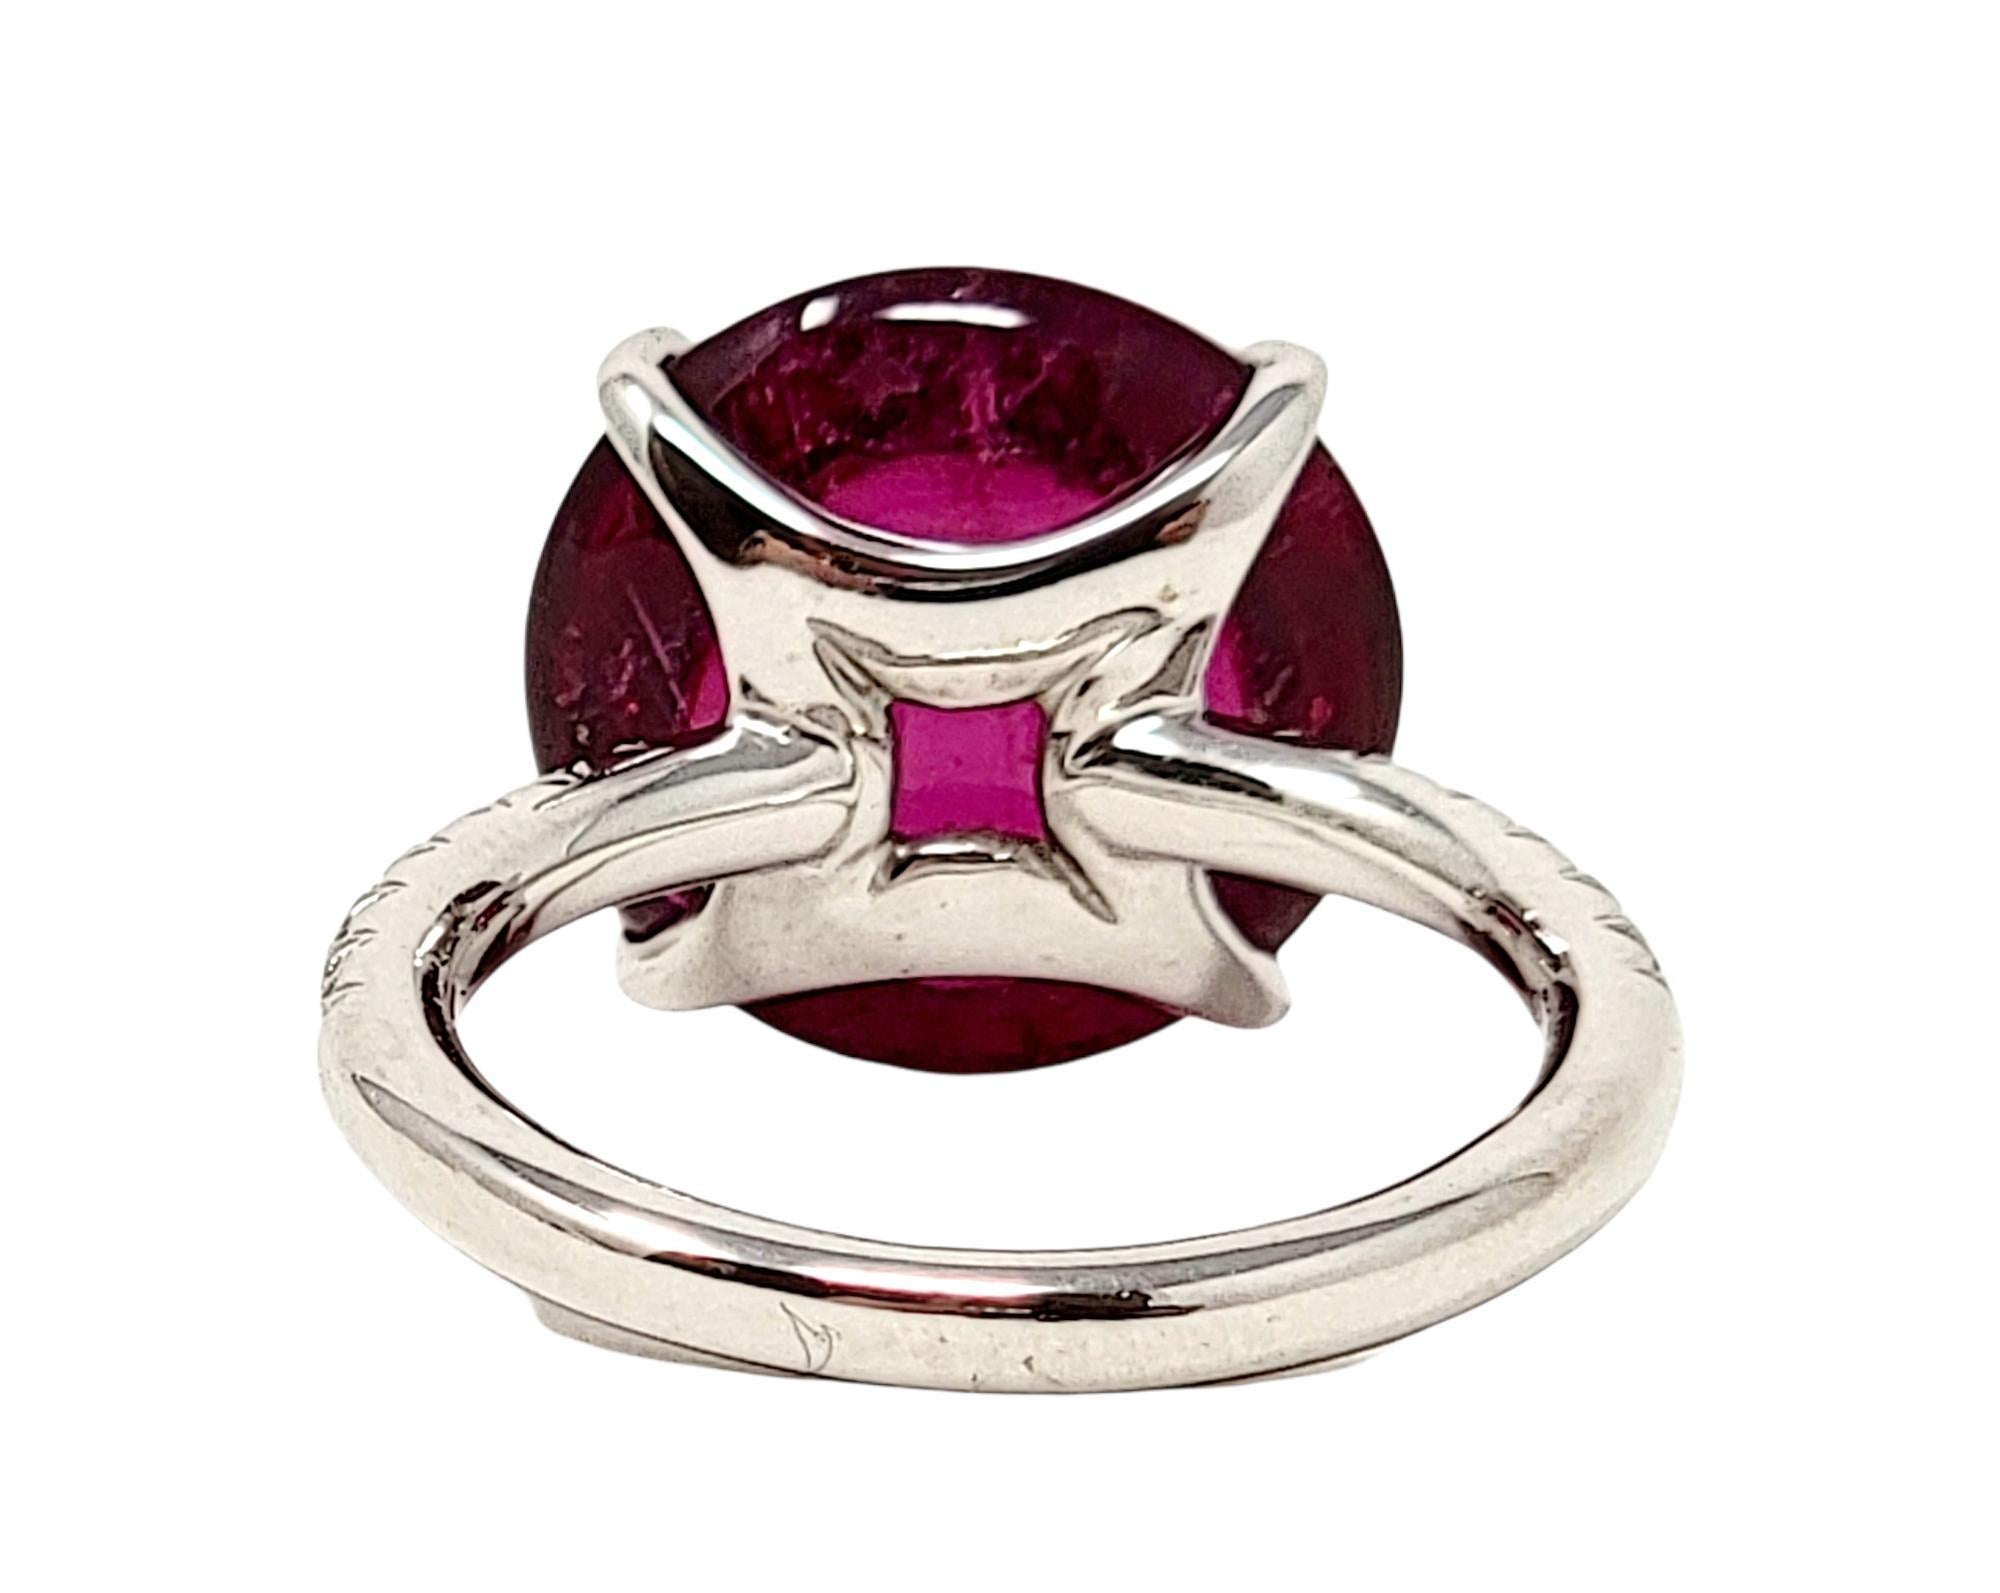 Cabochon Rubelite Solitaire 18 Karat White Gold Cocktail Ring with Pave Diamond For Sale 3